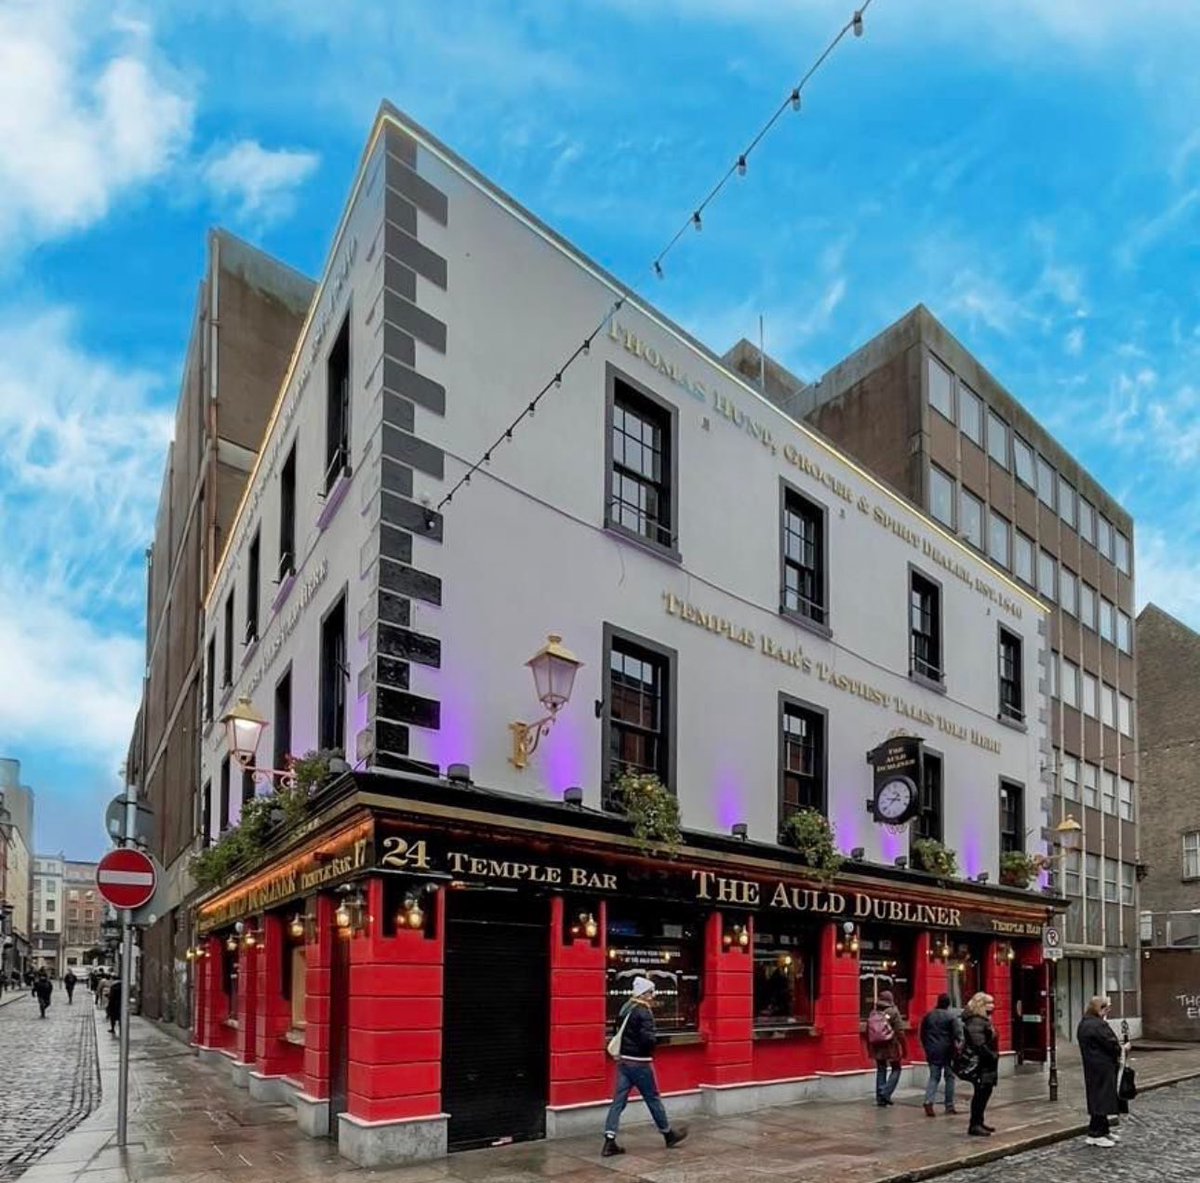 If you had planned to visit us this weekend - fear not, our Sister Pub @TheAuldDub_ is ready and waiting to welcome you with Live Music, Food & Drinks 🍻

Tell them we sent you 😉
#thenorseman #pub #templebar  #dublinpubs  #closedforrenovations #sisterpub #theaulddubliner